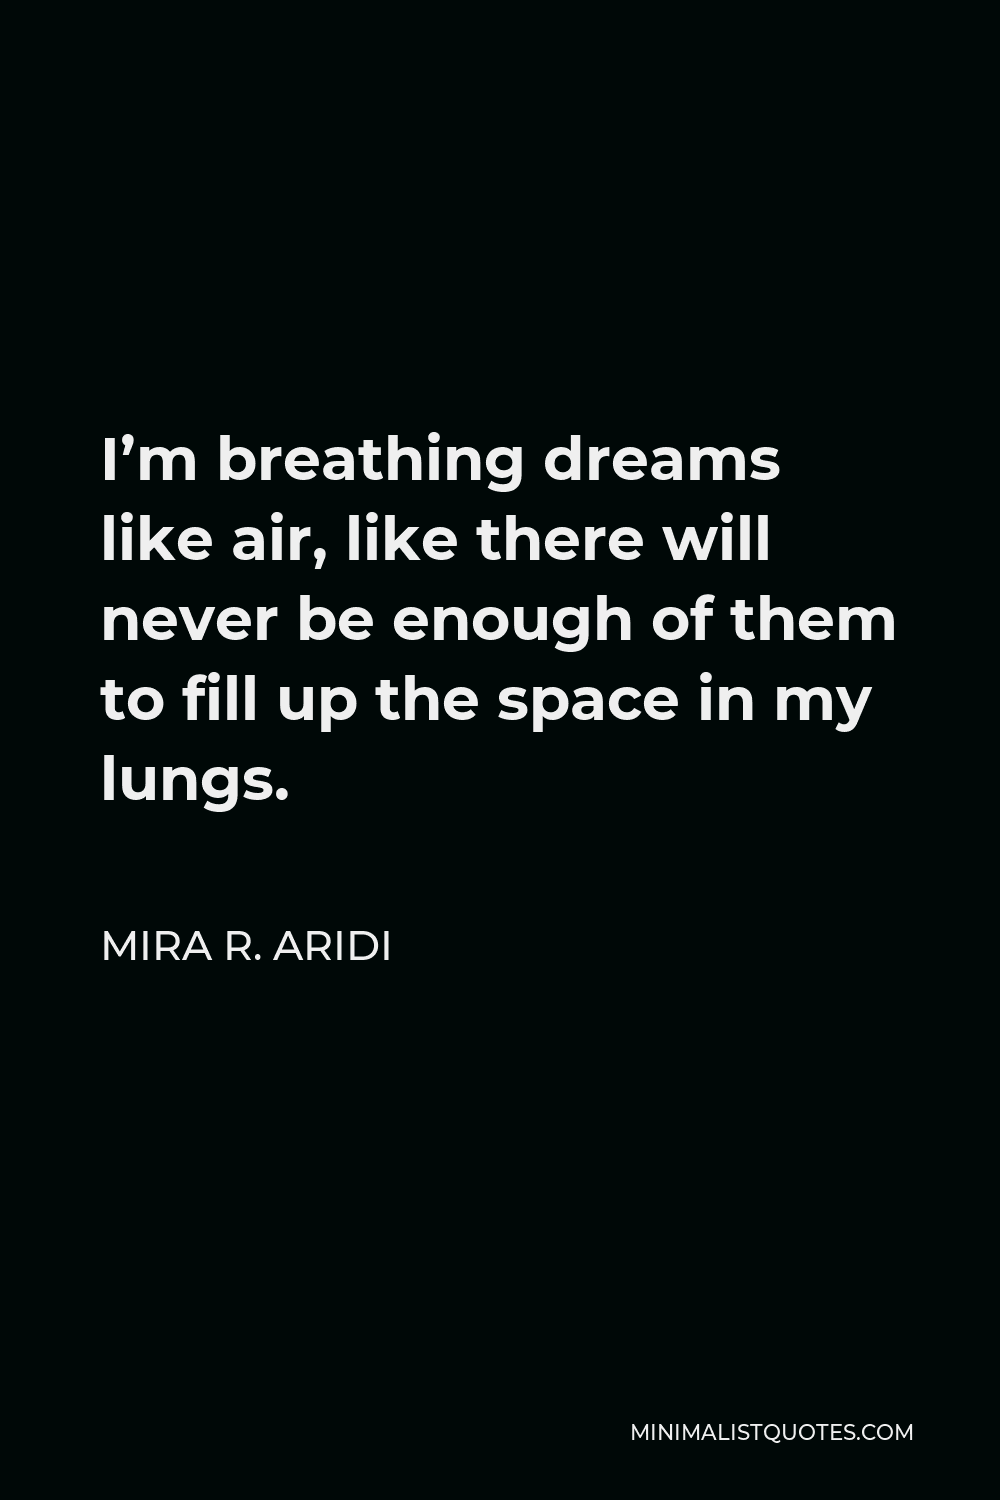 Mira R. Aridi Quote - I’m breathing dreams like air, like there will never be enough of them to fill up the space in my lungs.